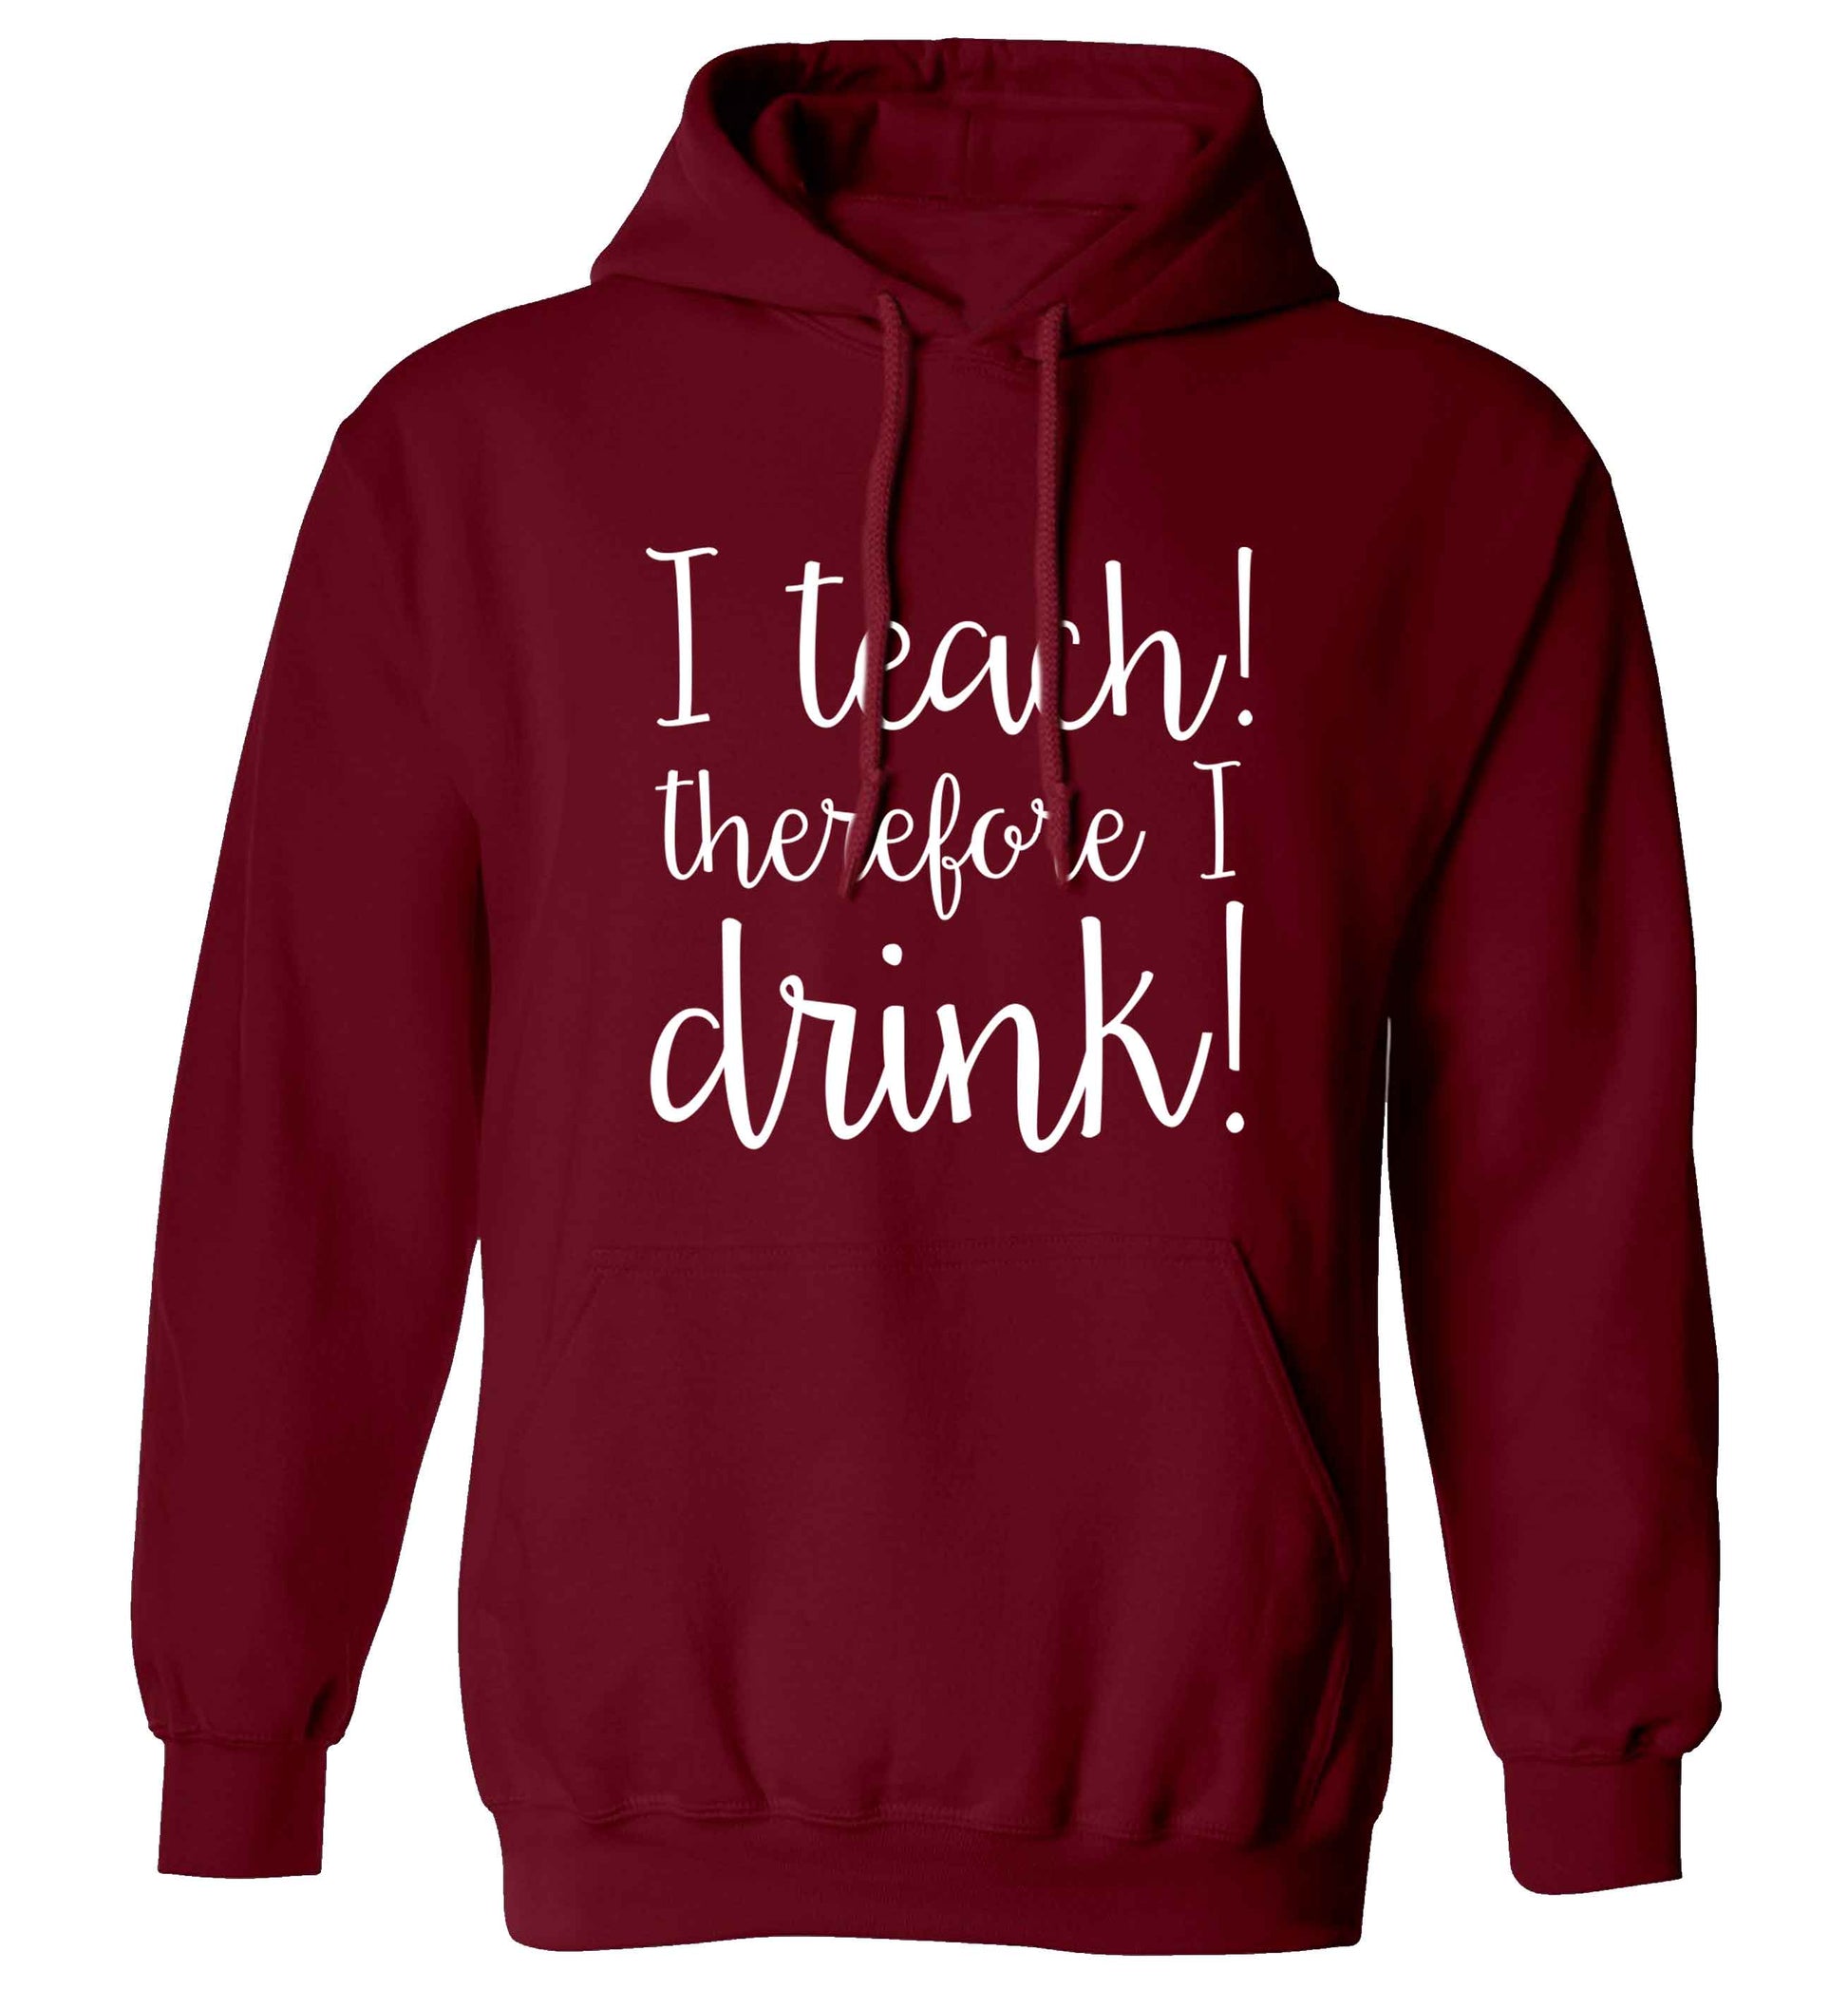 I teach therefore I drink adults unisex maroon hoodie 2XL